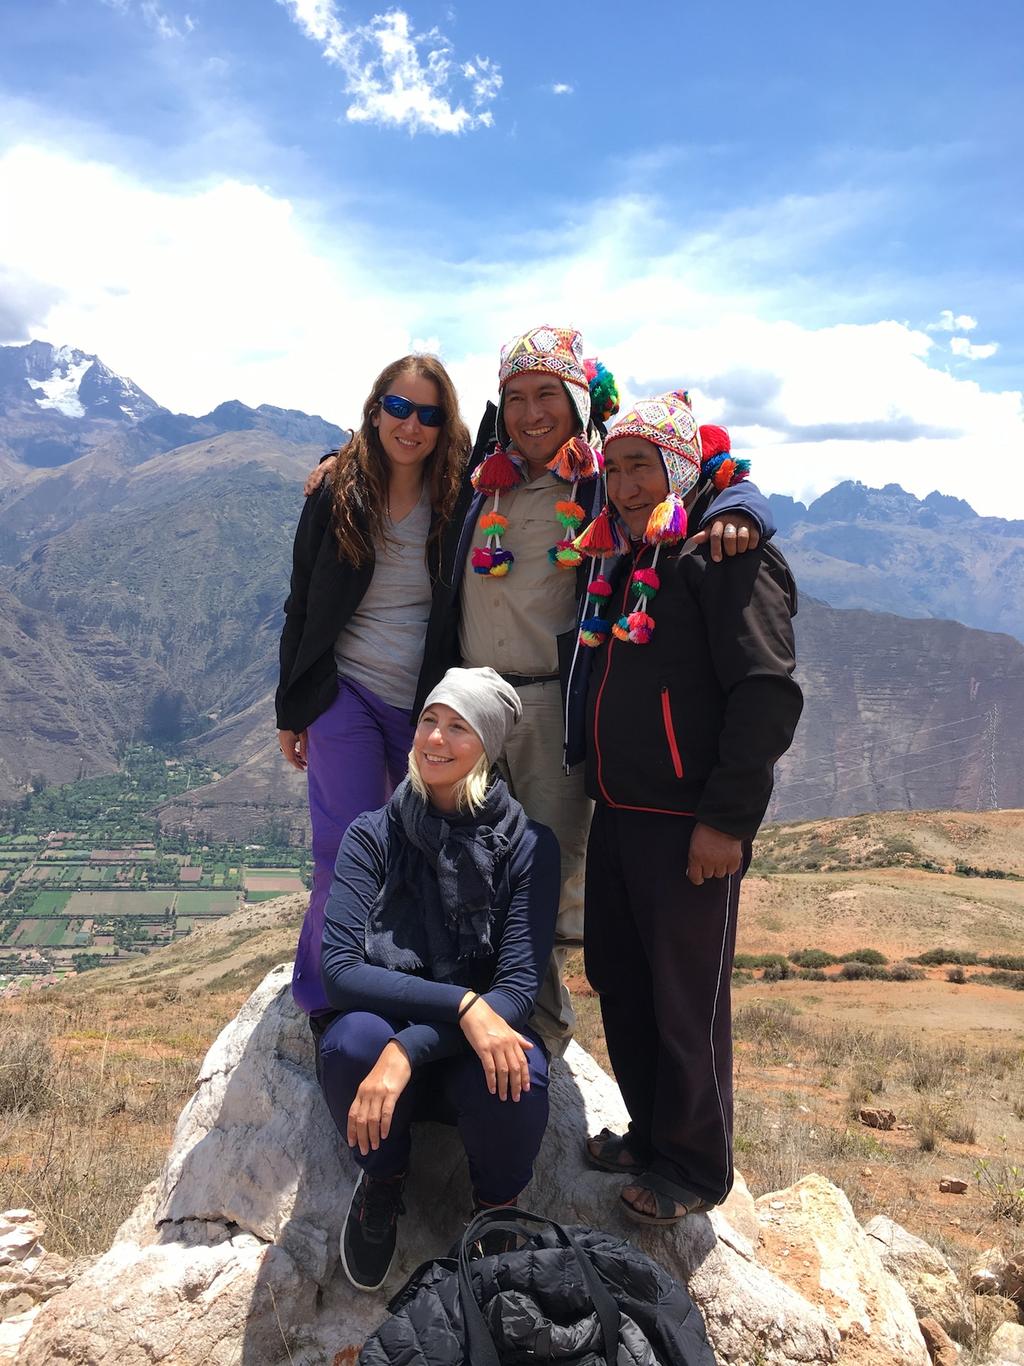 Mauk allaqta is located in the south area of Cusco city, about 4100 meters above sea level, it is distinguished as